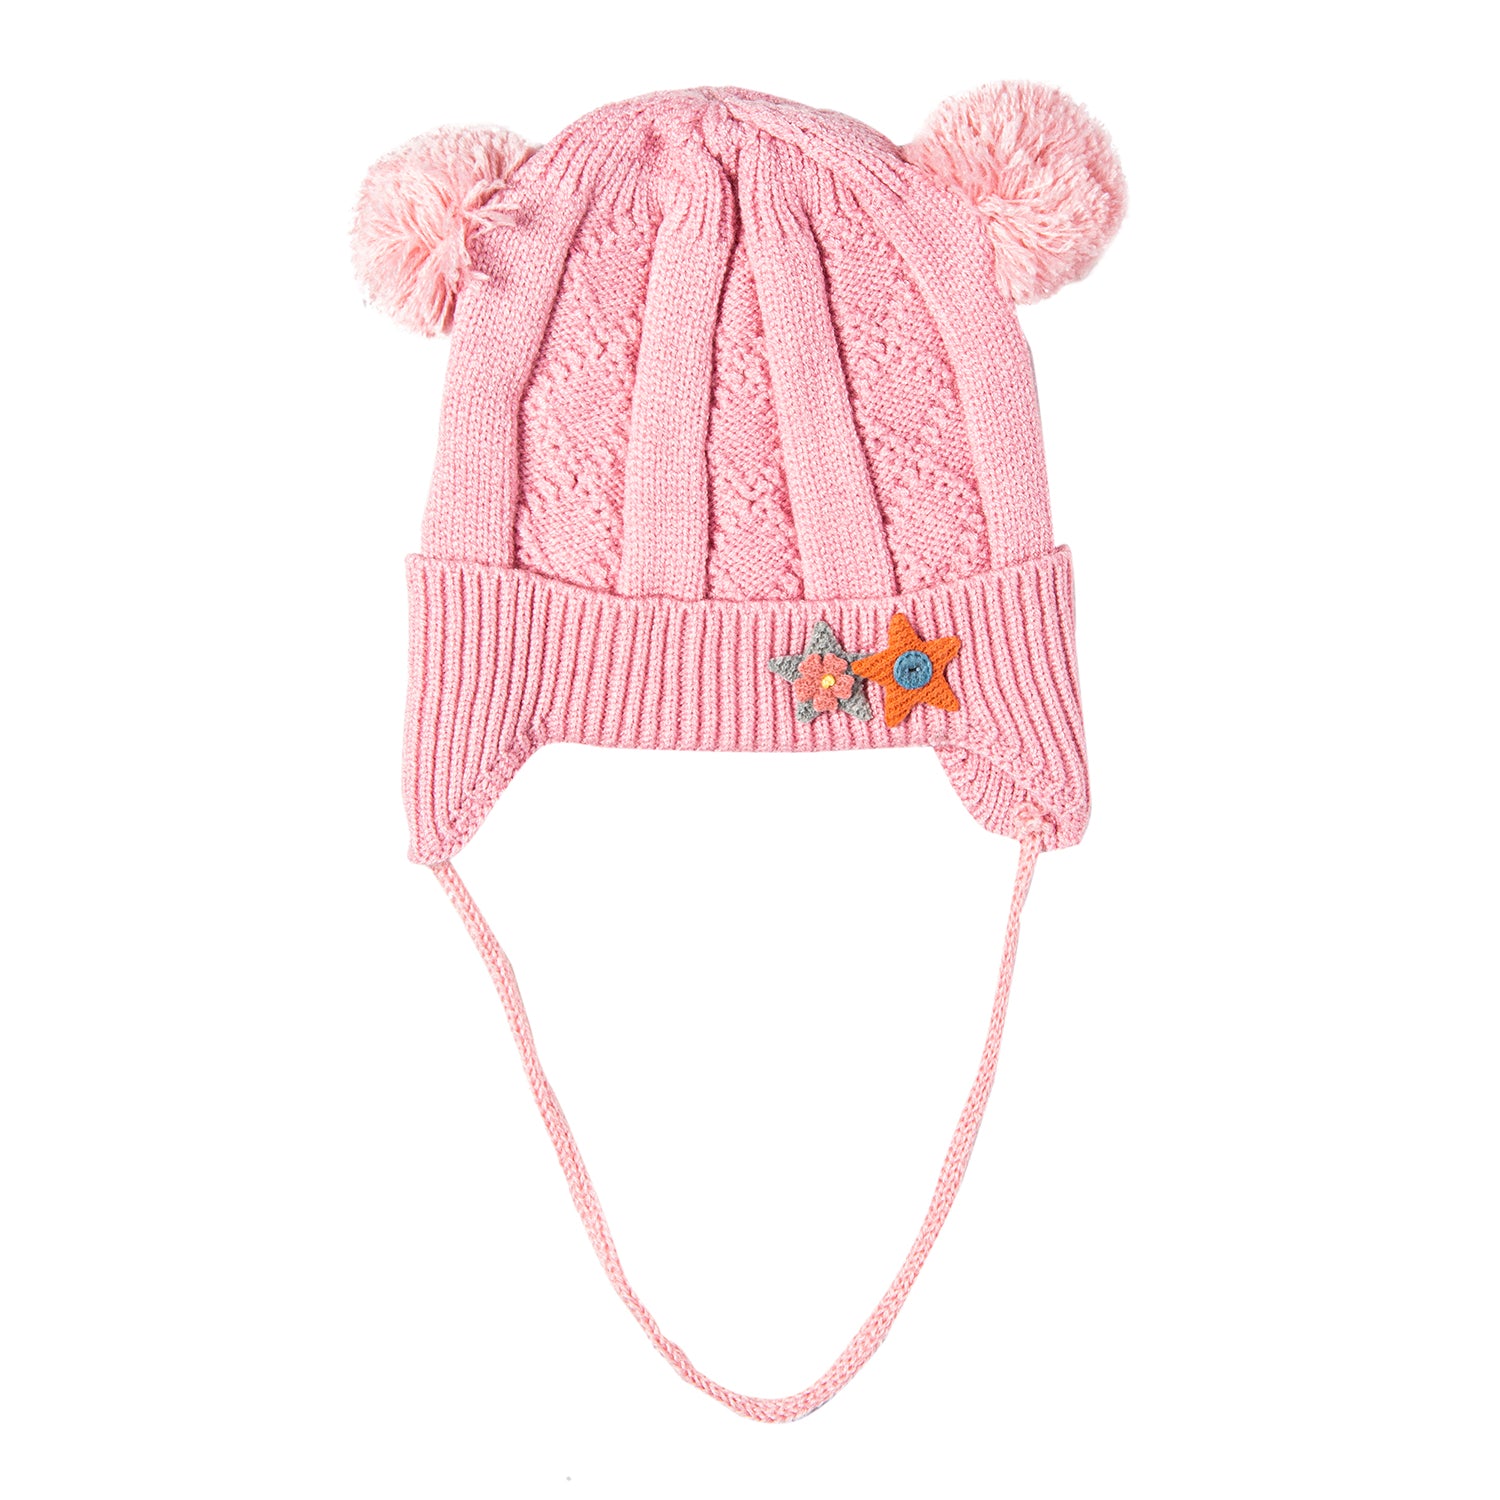 Baby Moo Knit Woollen Cap With Tie For Ear Cover Starry Pom Pom Pink